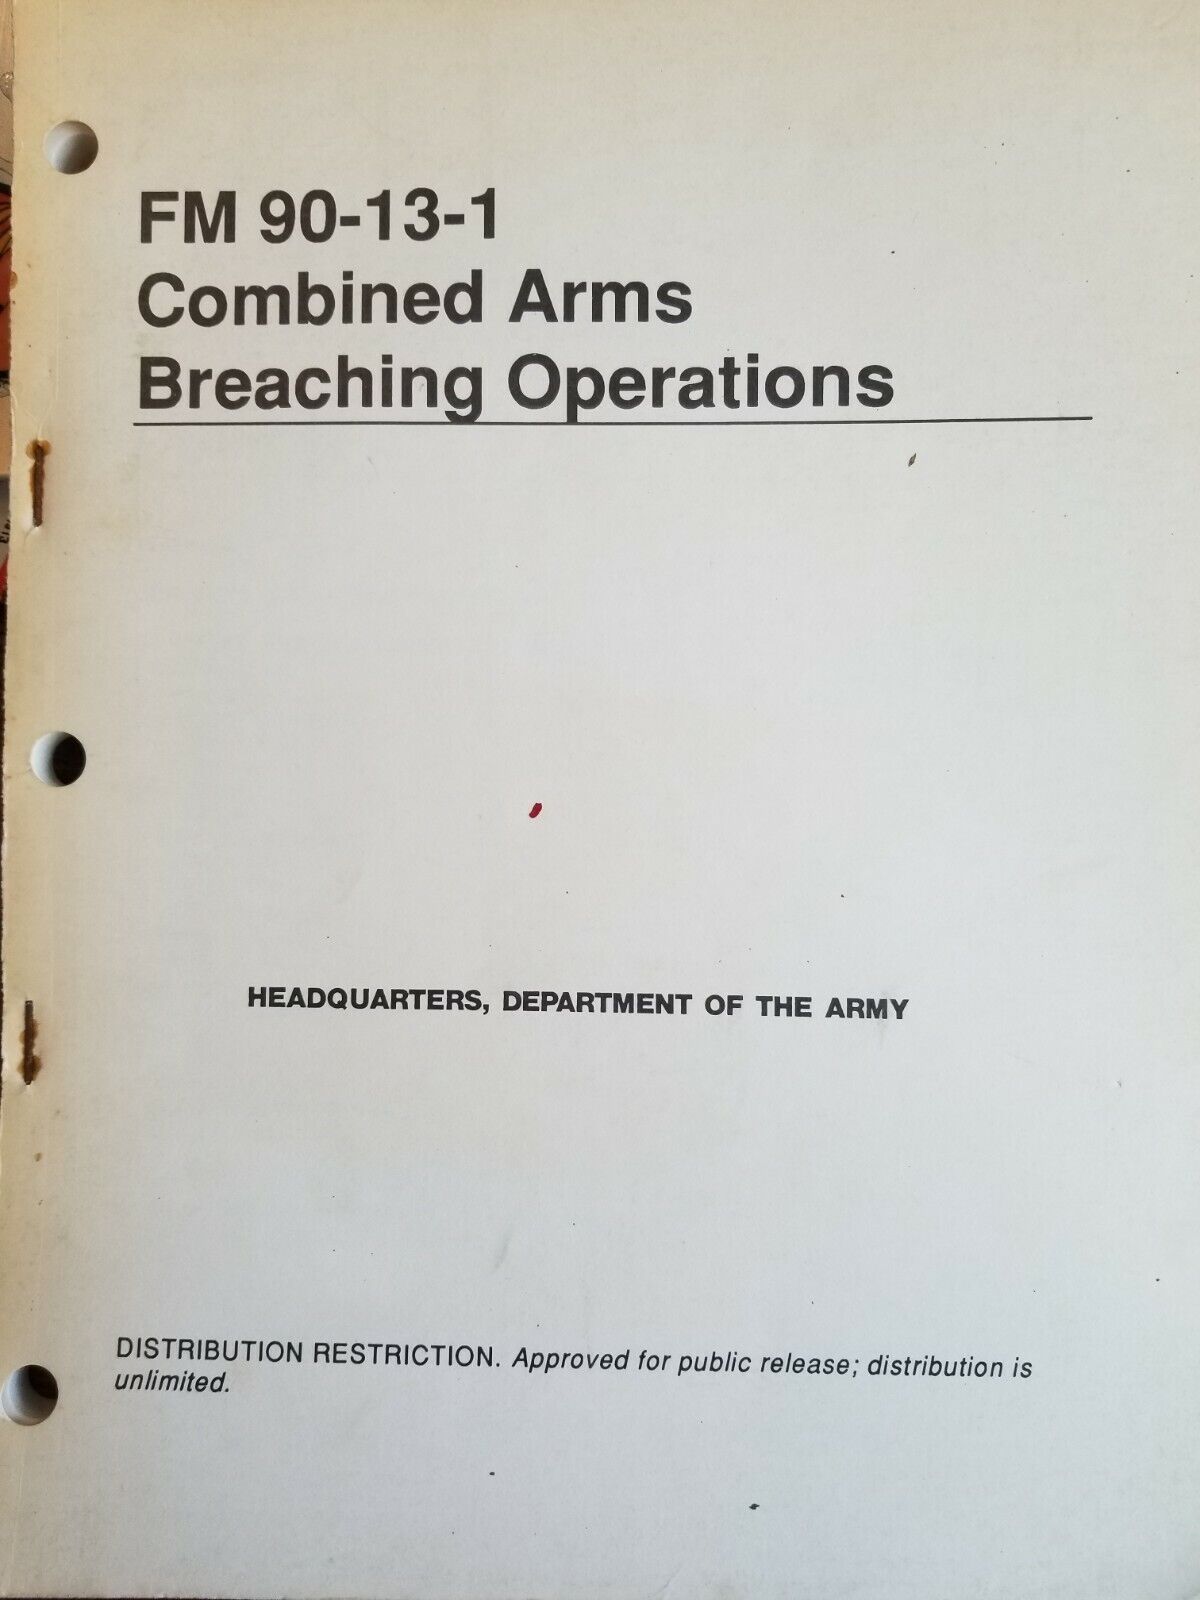 Fm 90-13-1 Combined Arms Breaching Operations, 28 February 1991